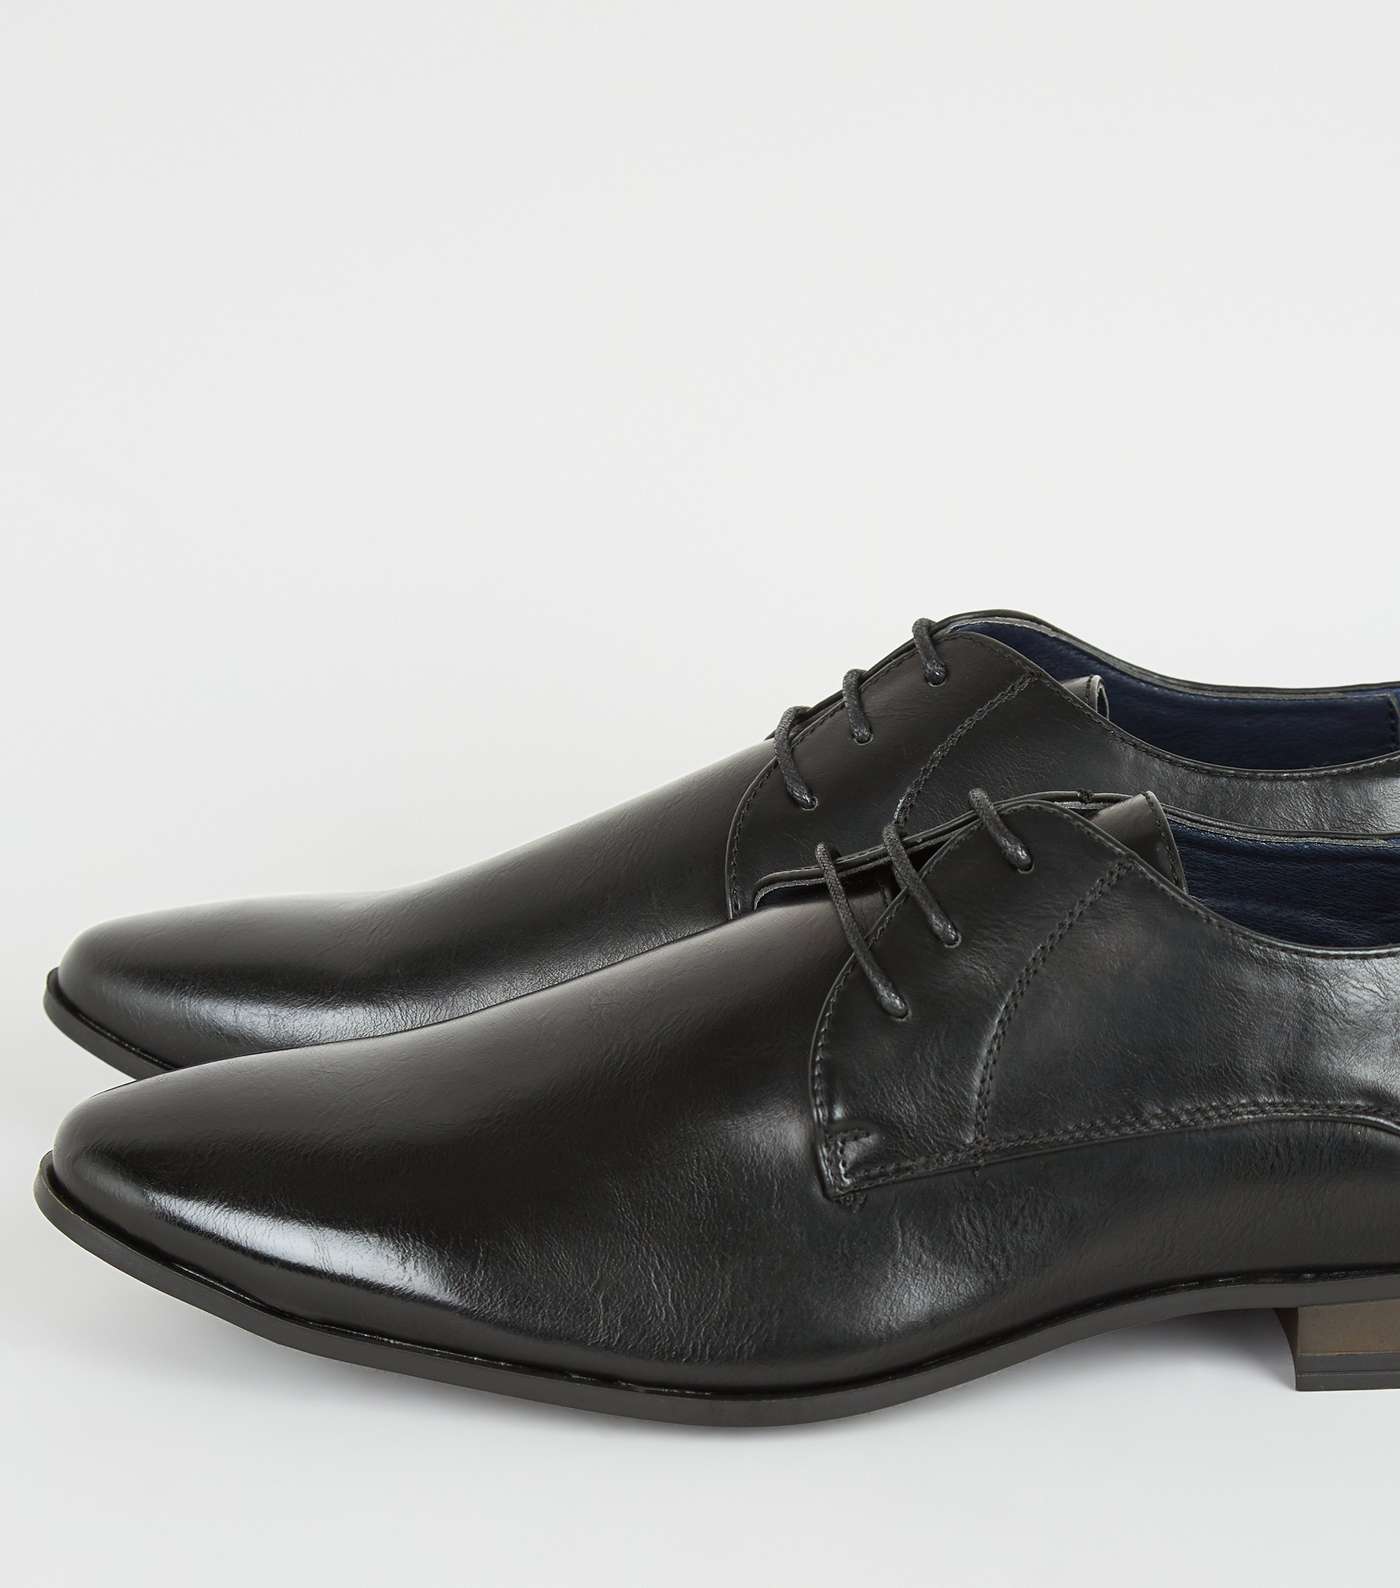 Black Leather-Look Lace Up Formal Shoes Image 3